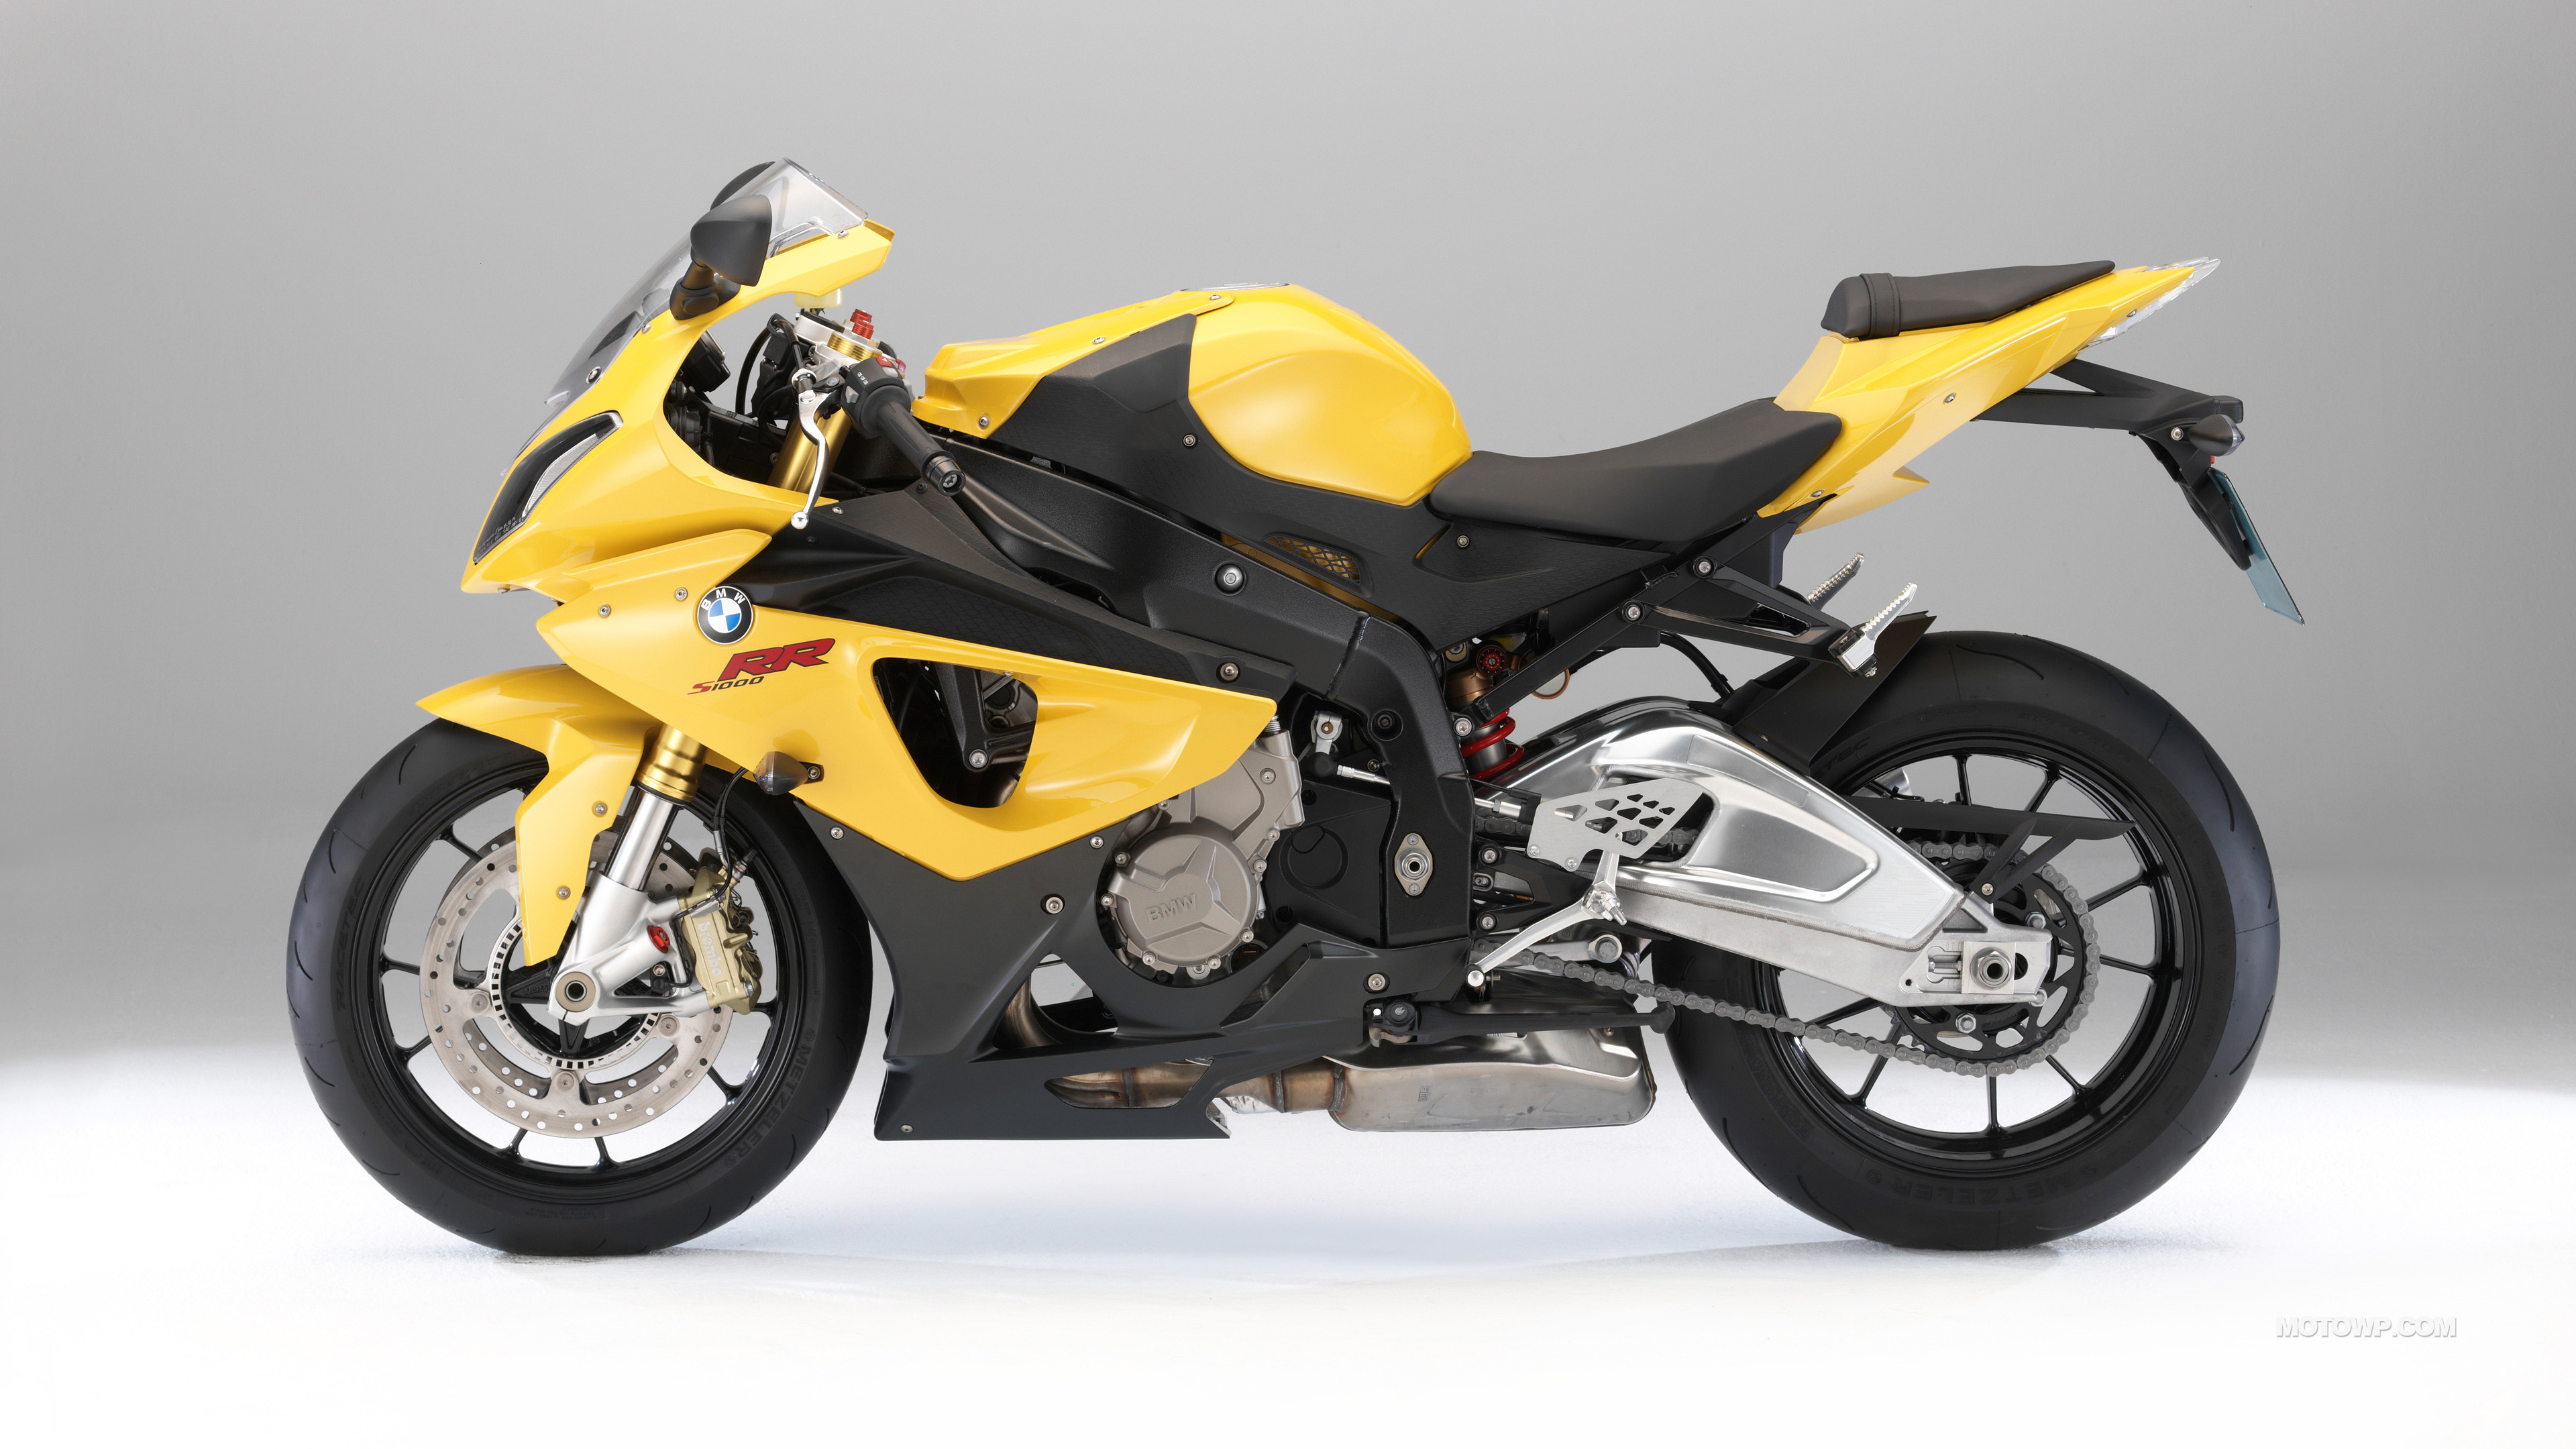 3840x2160 Motorcycle wallpapers BMW S 1000 RR ...